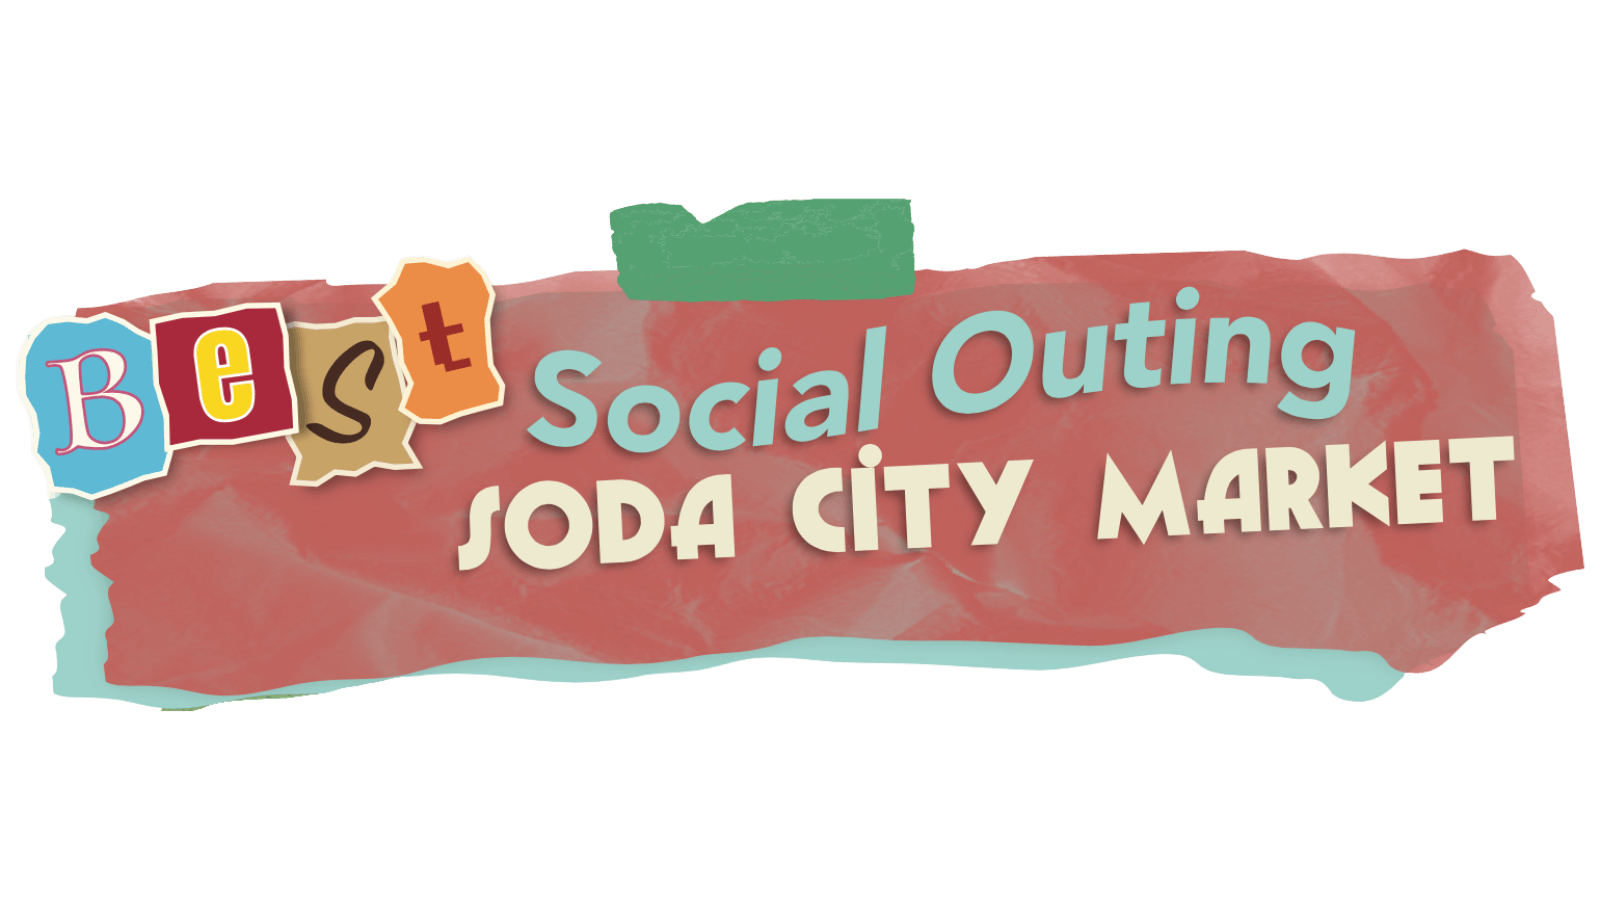 Photo for Best Social Outing: Soda City Market